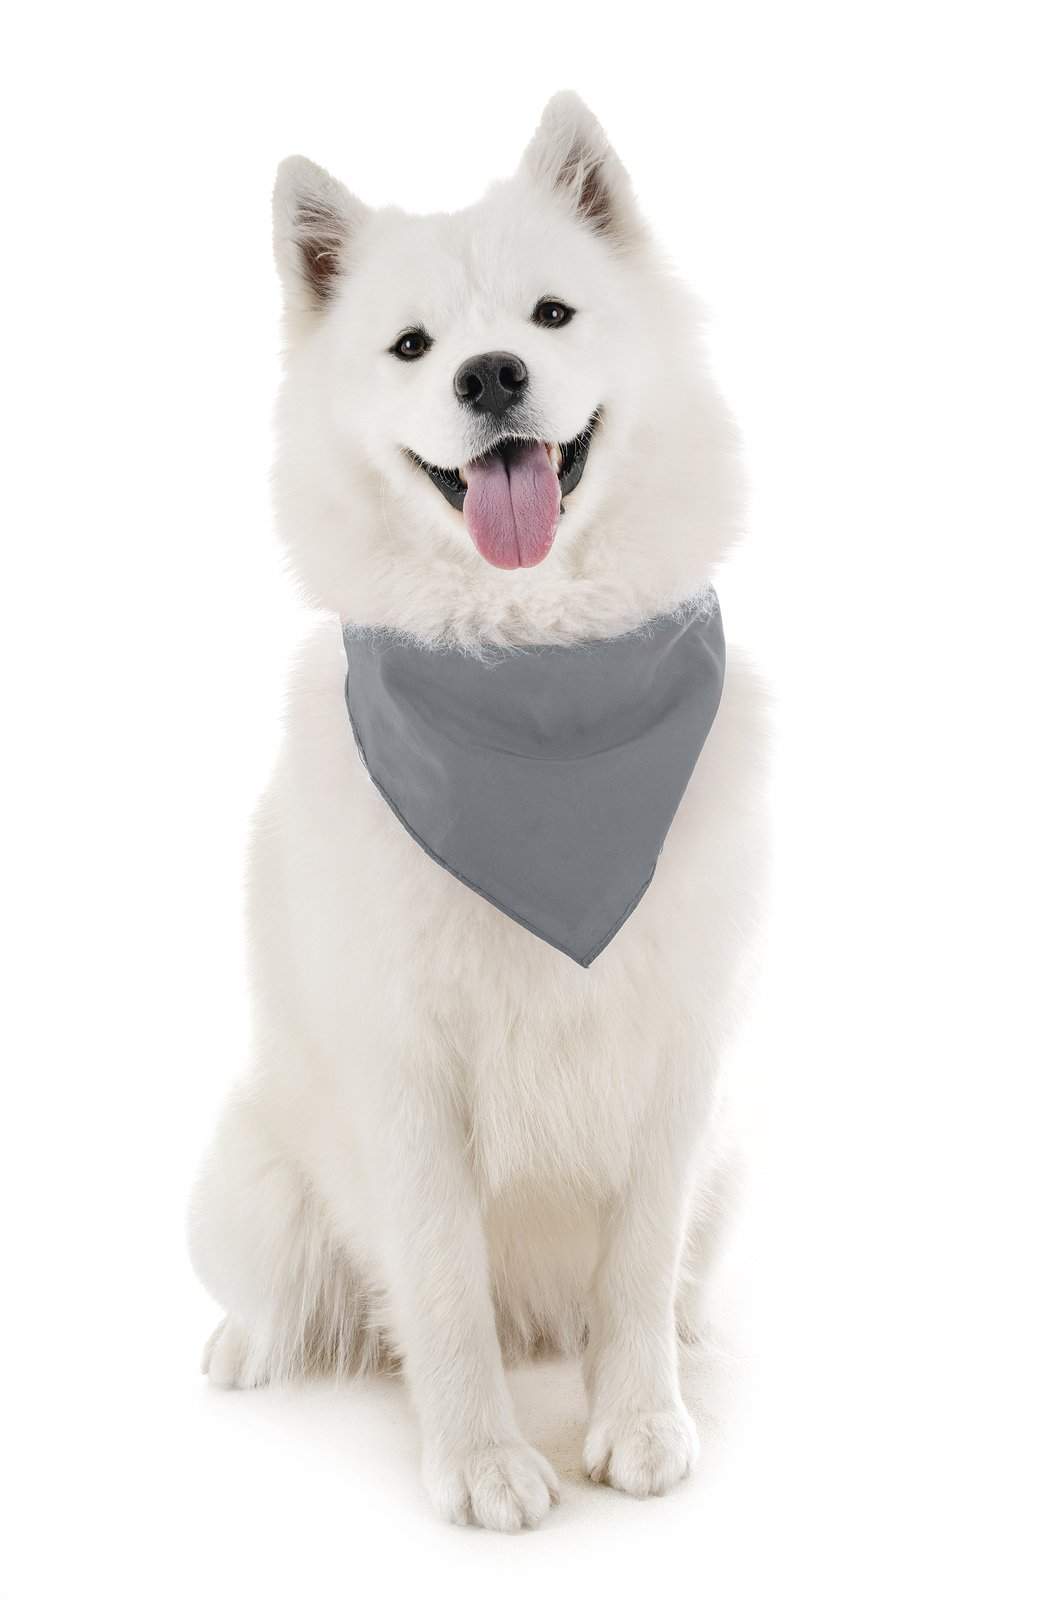 Jordefano Dog Bandanas - 7 Pack - Scarf Triangle Bibs for Small, Medium and Large Puppies, Dogs and Cats